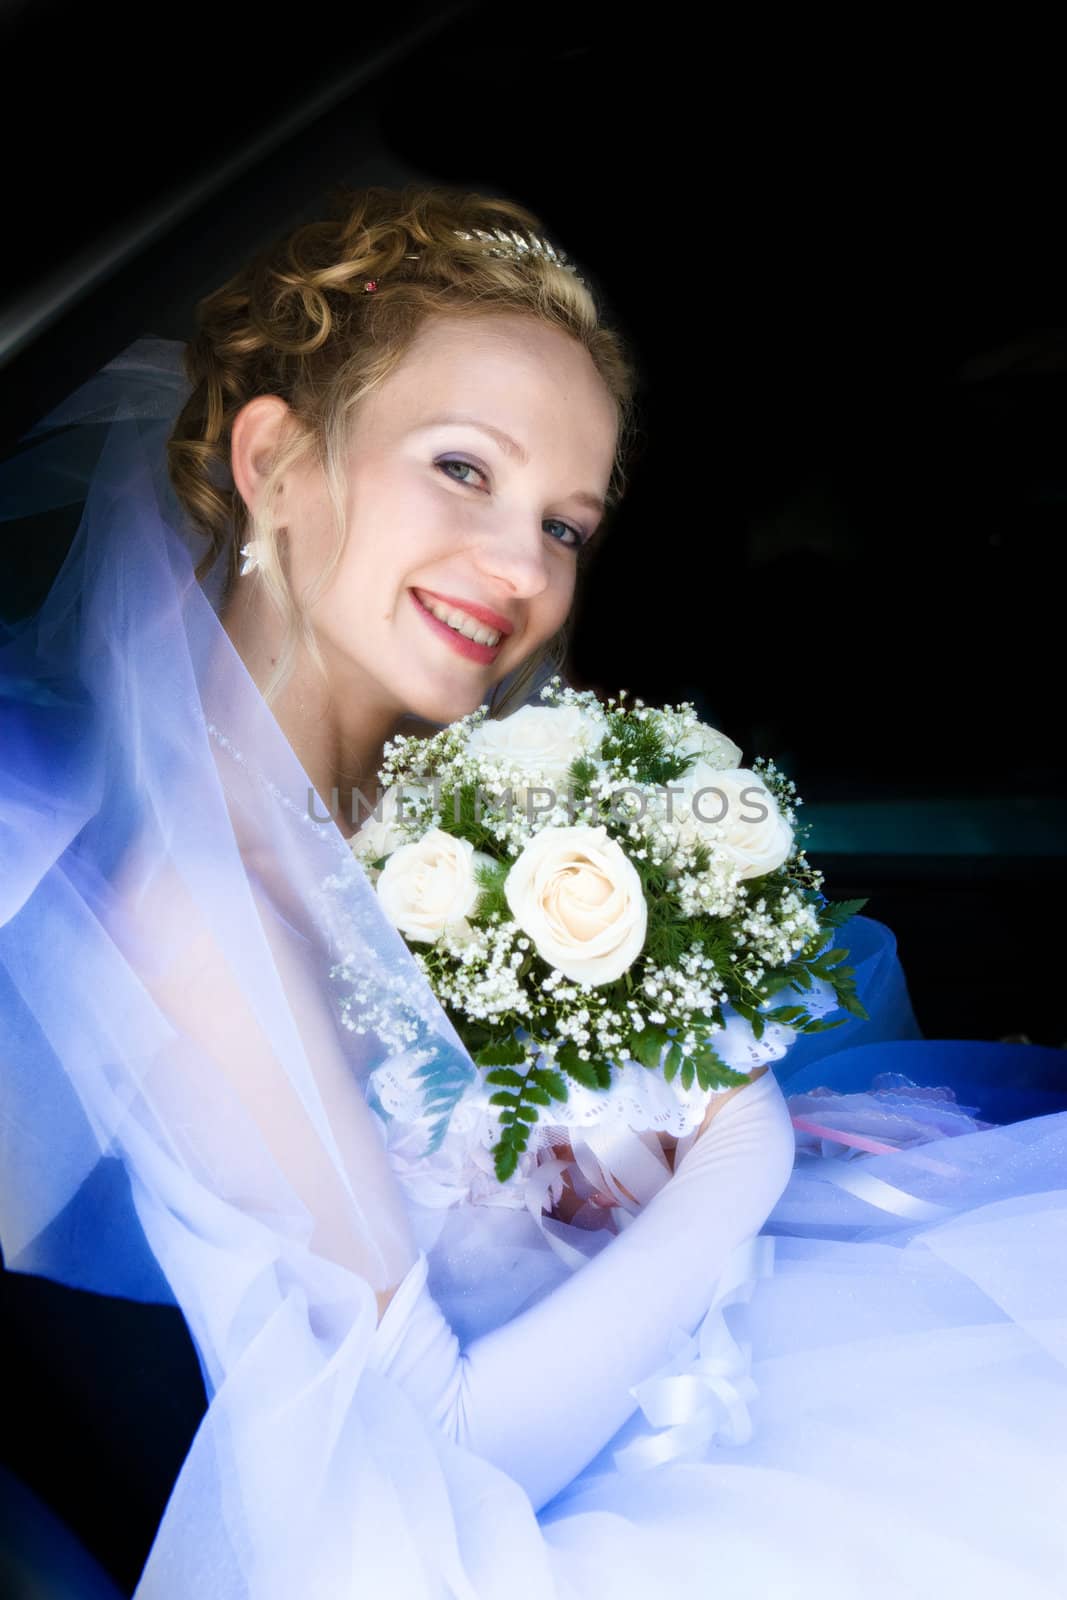 bride with a flower bouquet in a car by vsurkov